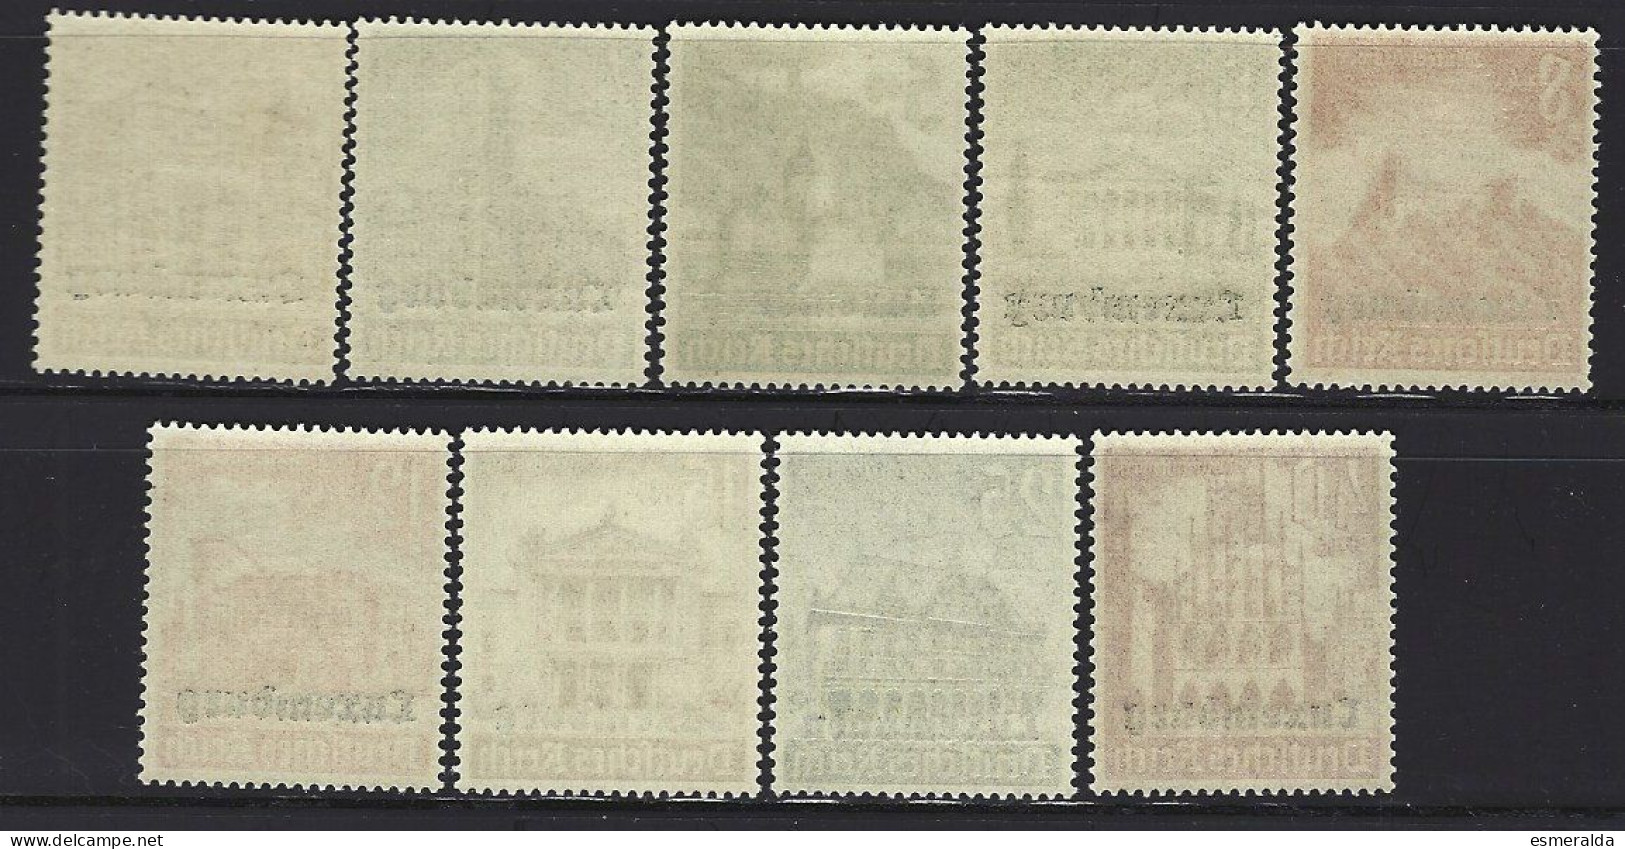 Luxembourg Yv Occupation Allemande 33/41(Secours D'hiver) Surchargés, **/mnh - 1940-1944 Occupation Allemande